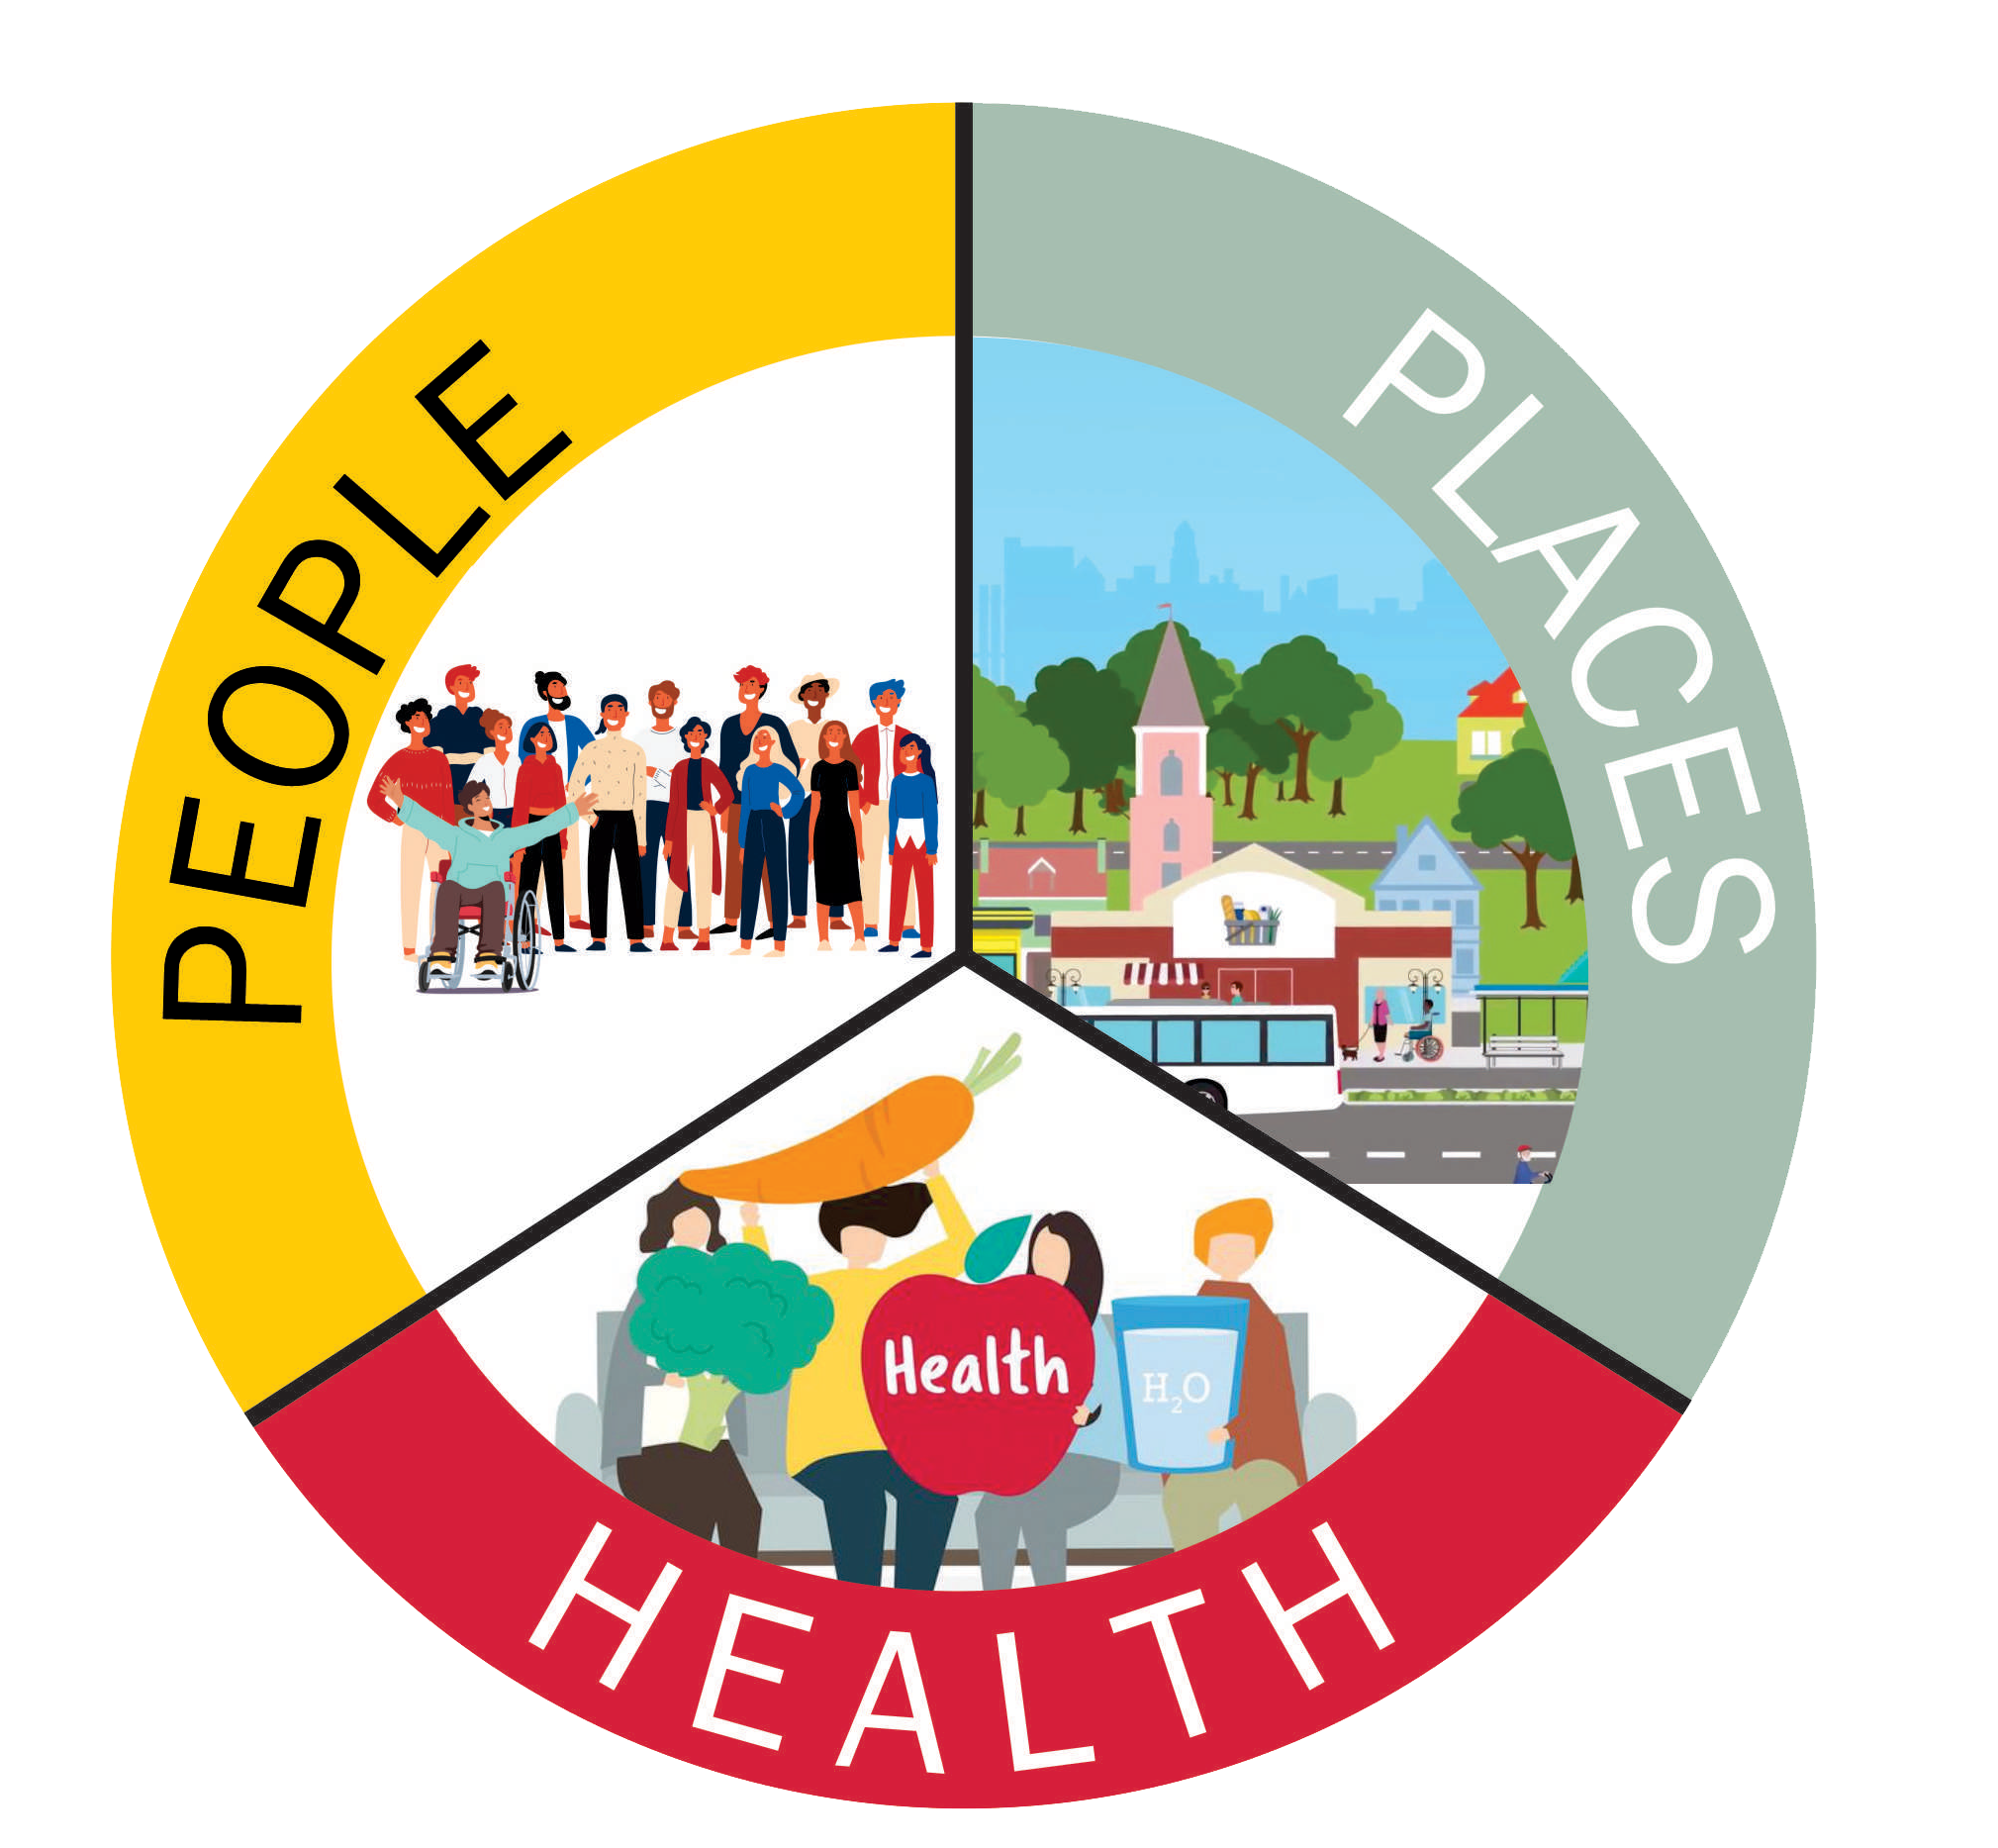 People, Places and Health